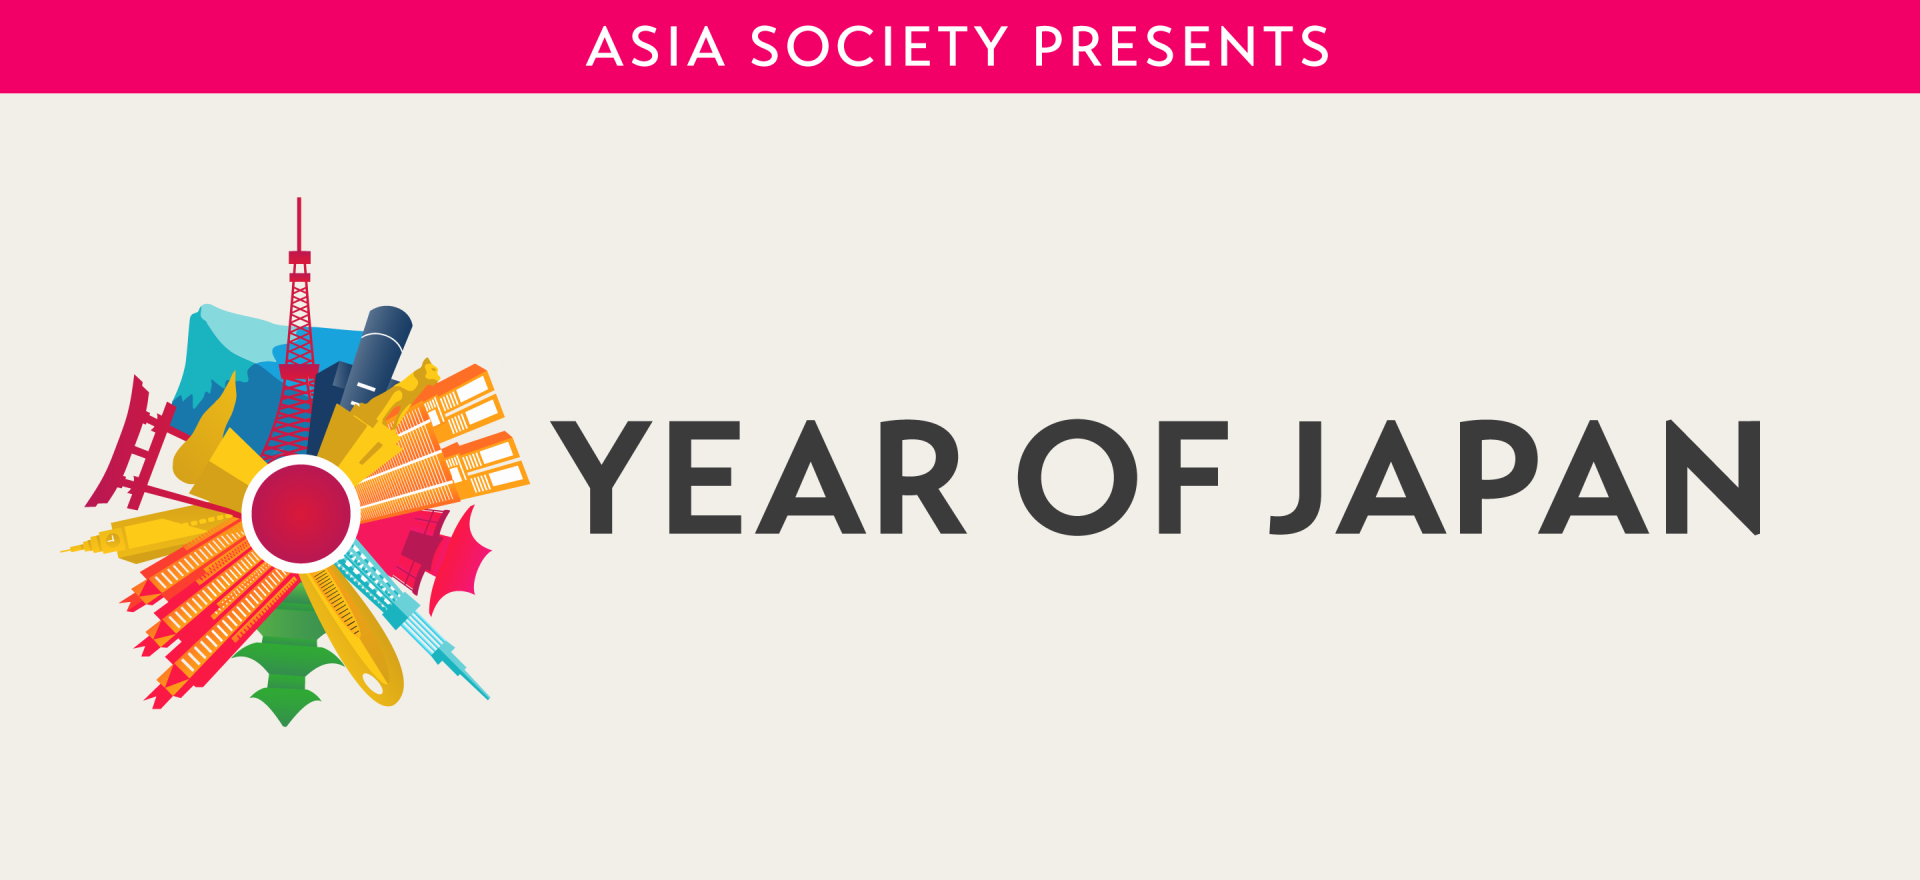 Asia Society Presents Year of Japan